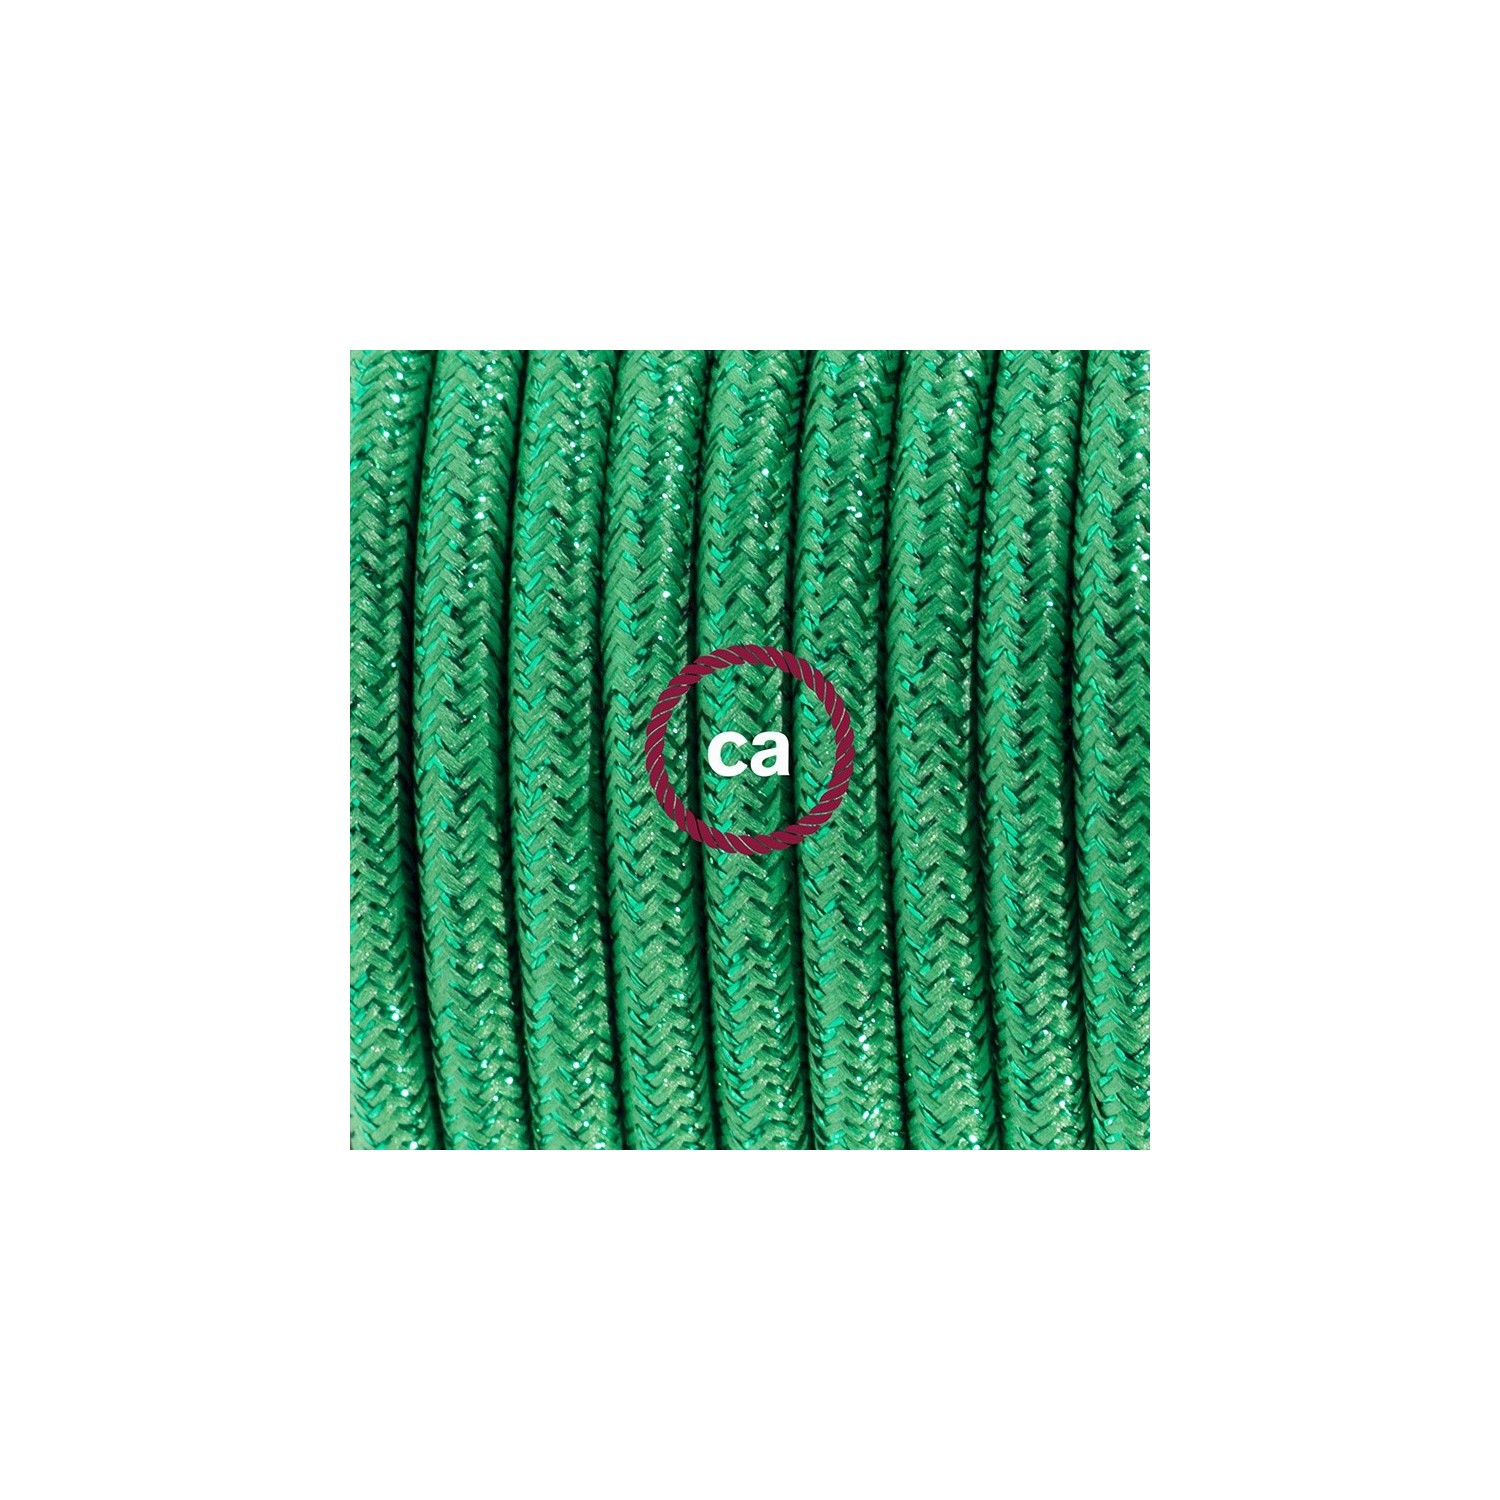 Create your RL06 Glittering Green Snake and bring the light wherever you want.